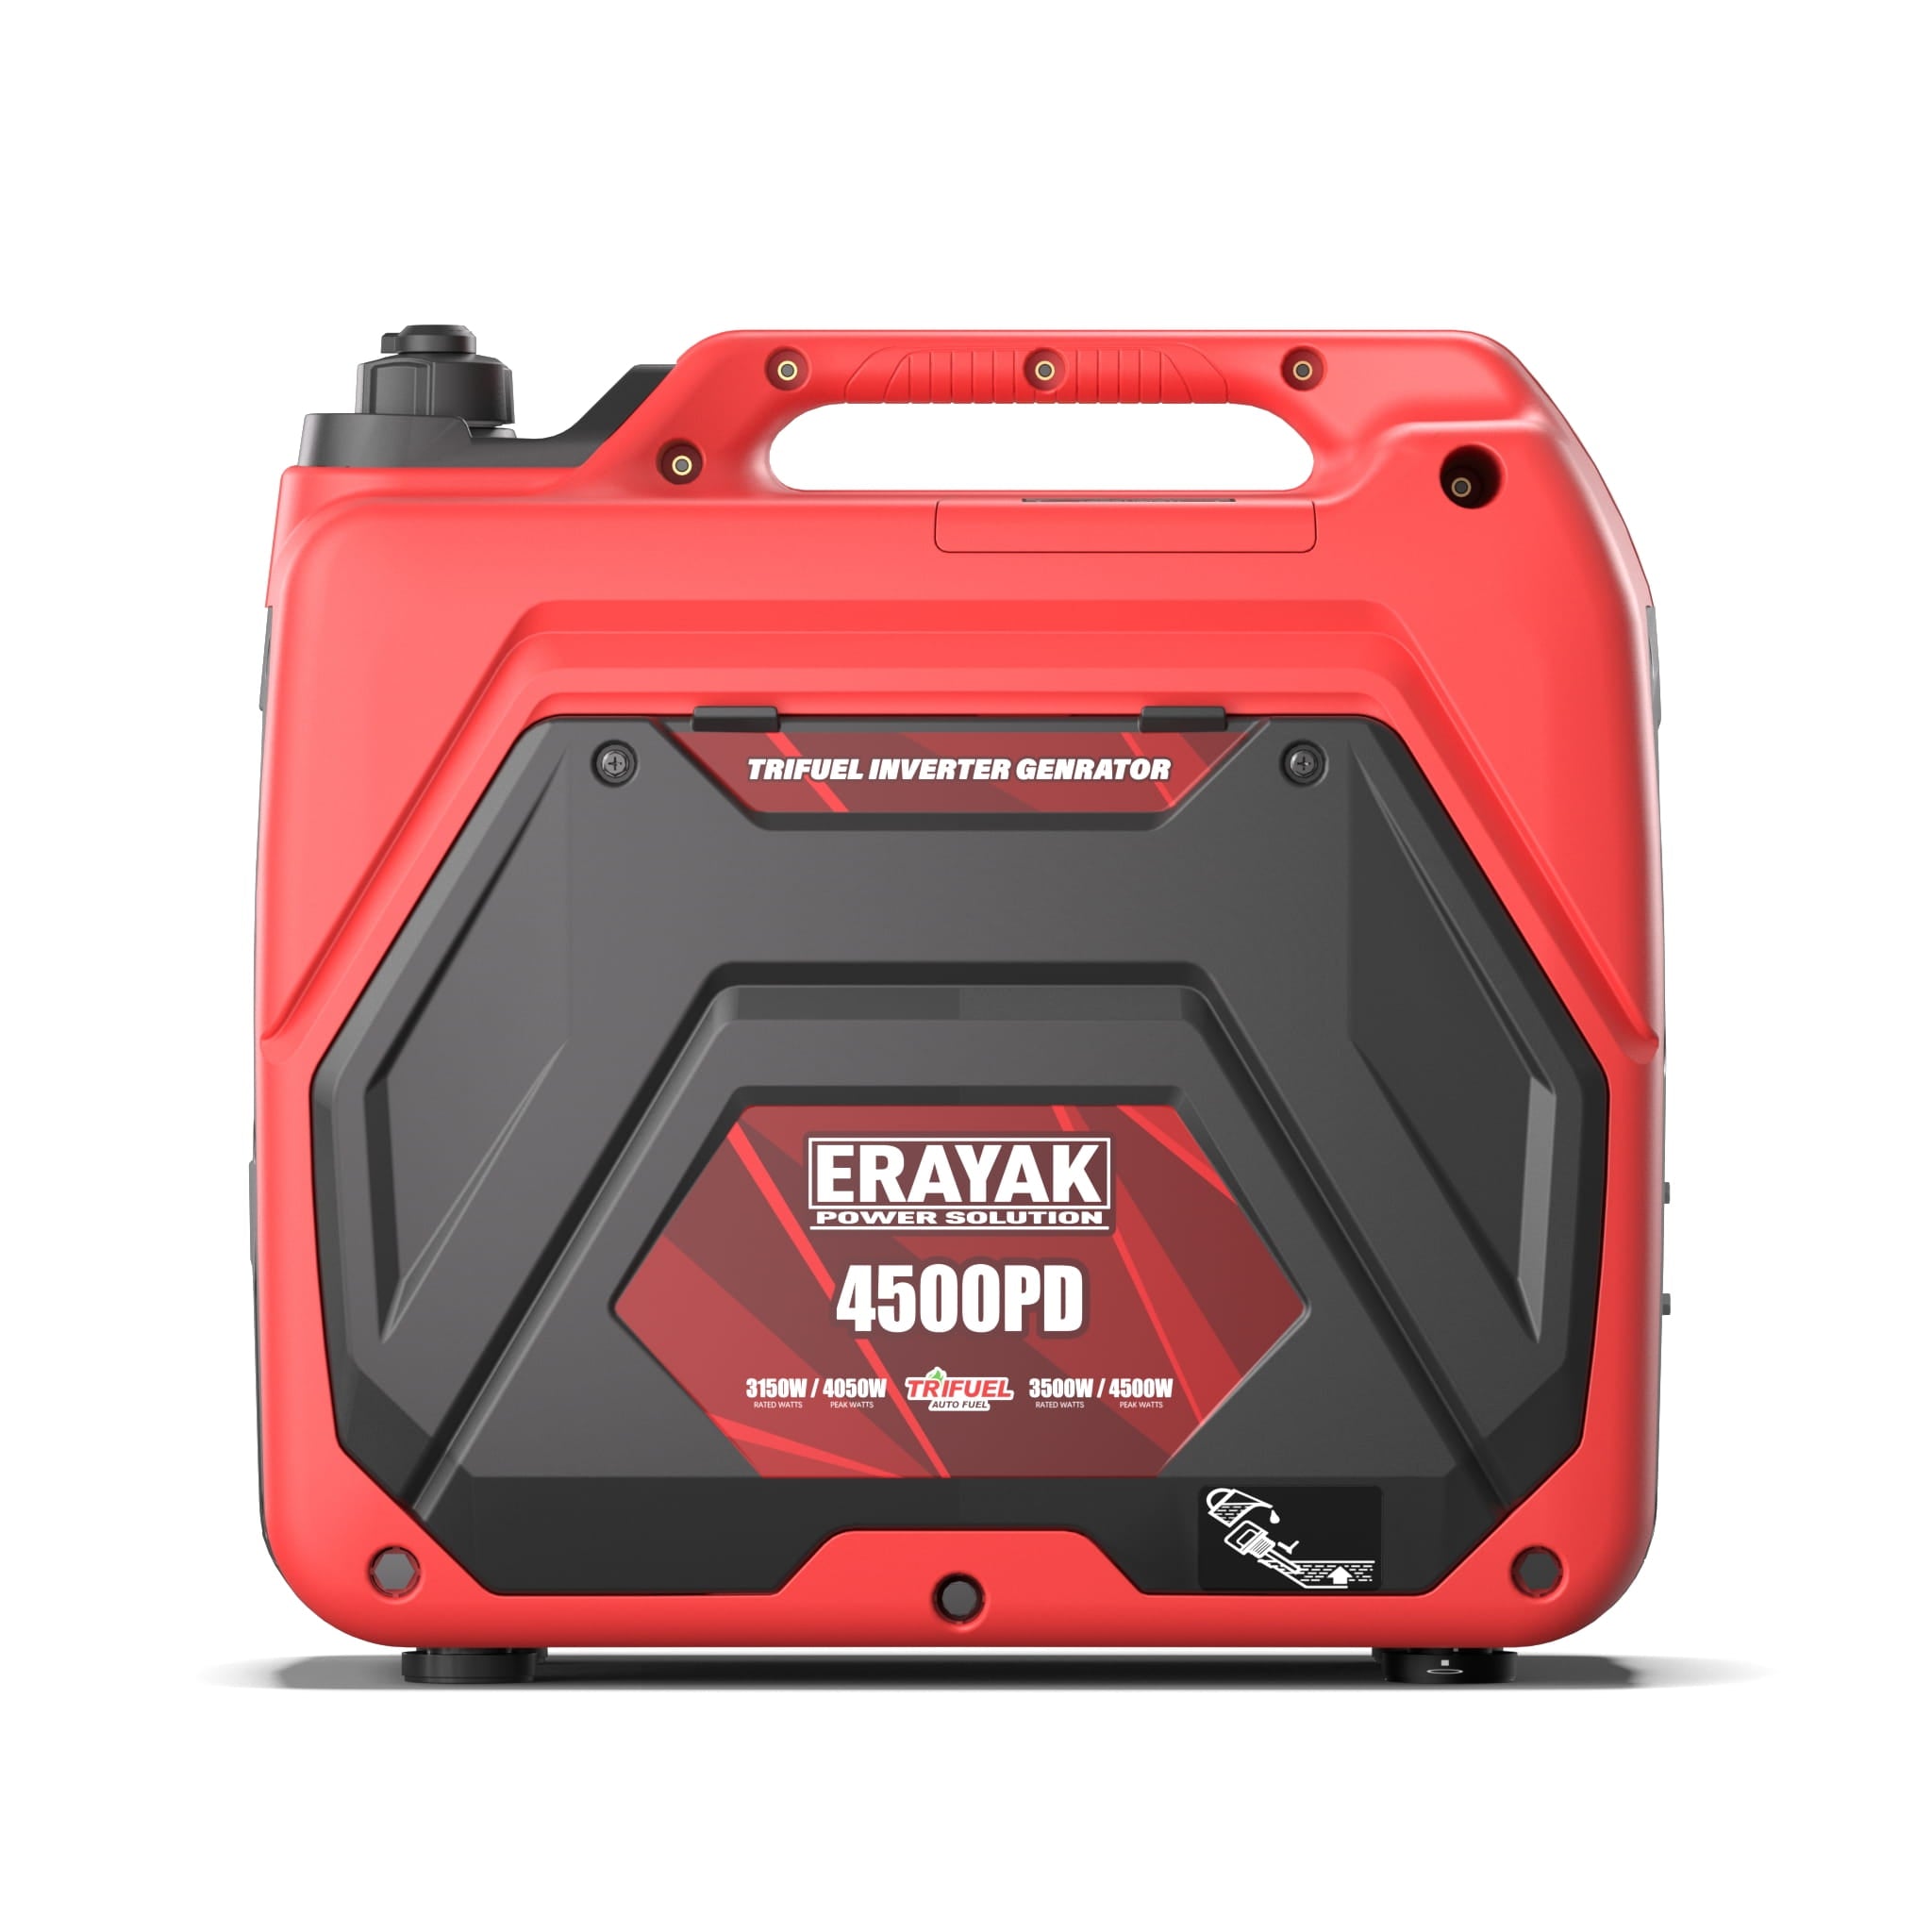 Erayak Portble Inverter Generator 4500W, Tri-Fuel, Dual-Fuel, 30A Outlet, Super Quiet, For RV, Camping & Home, EYG4500PD